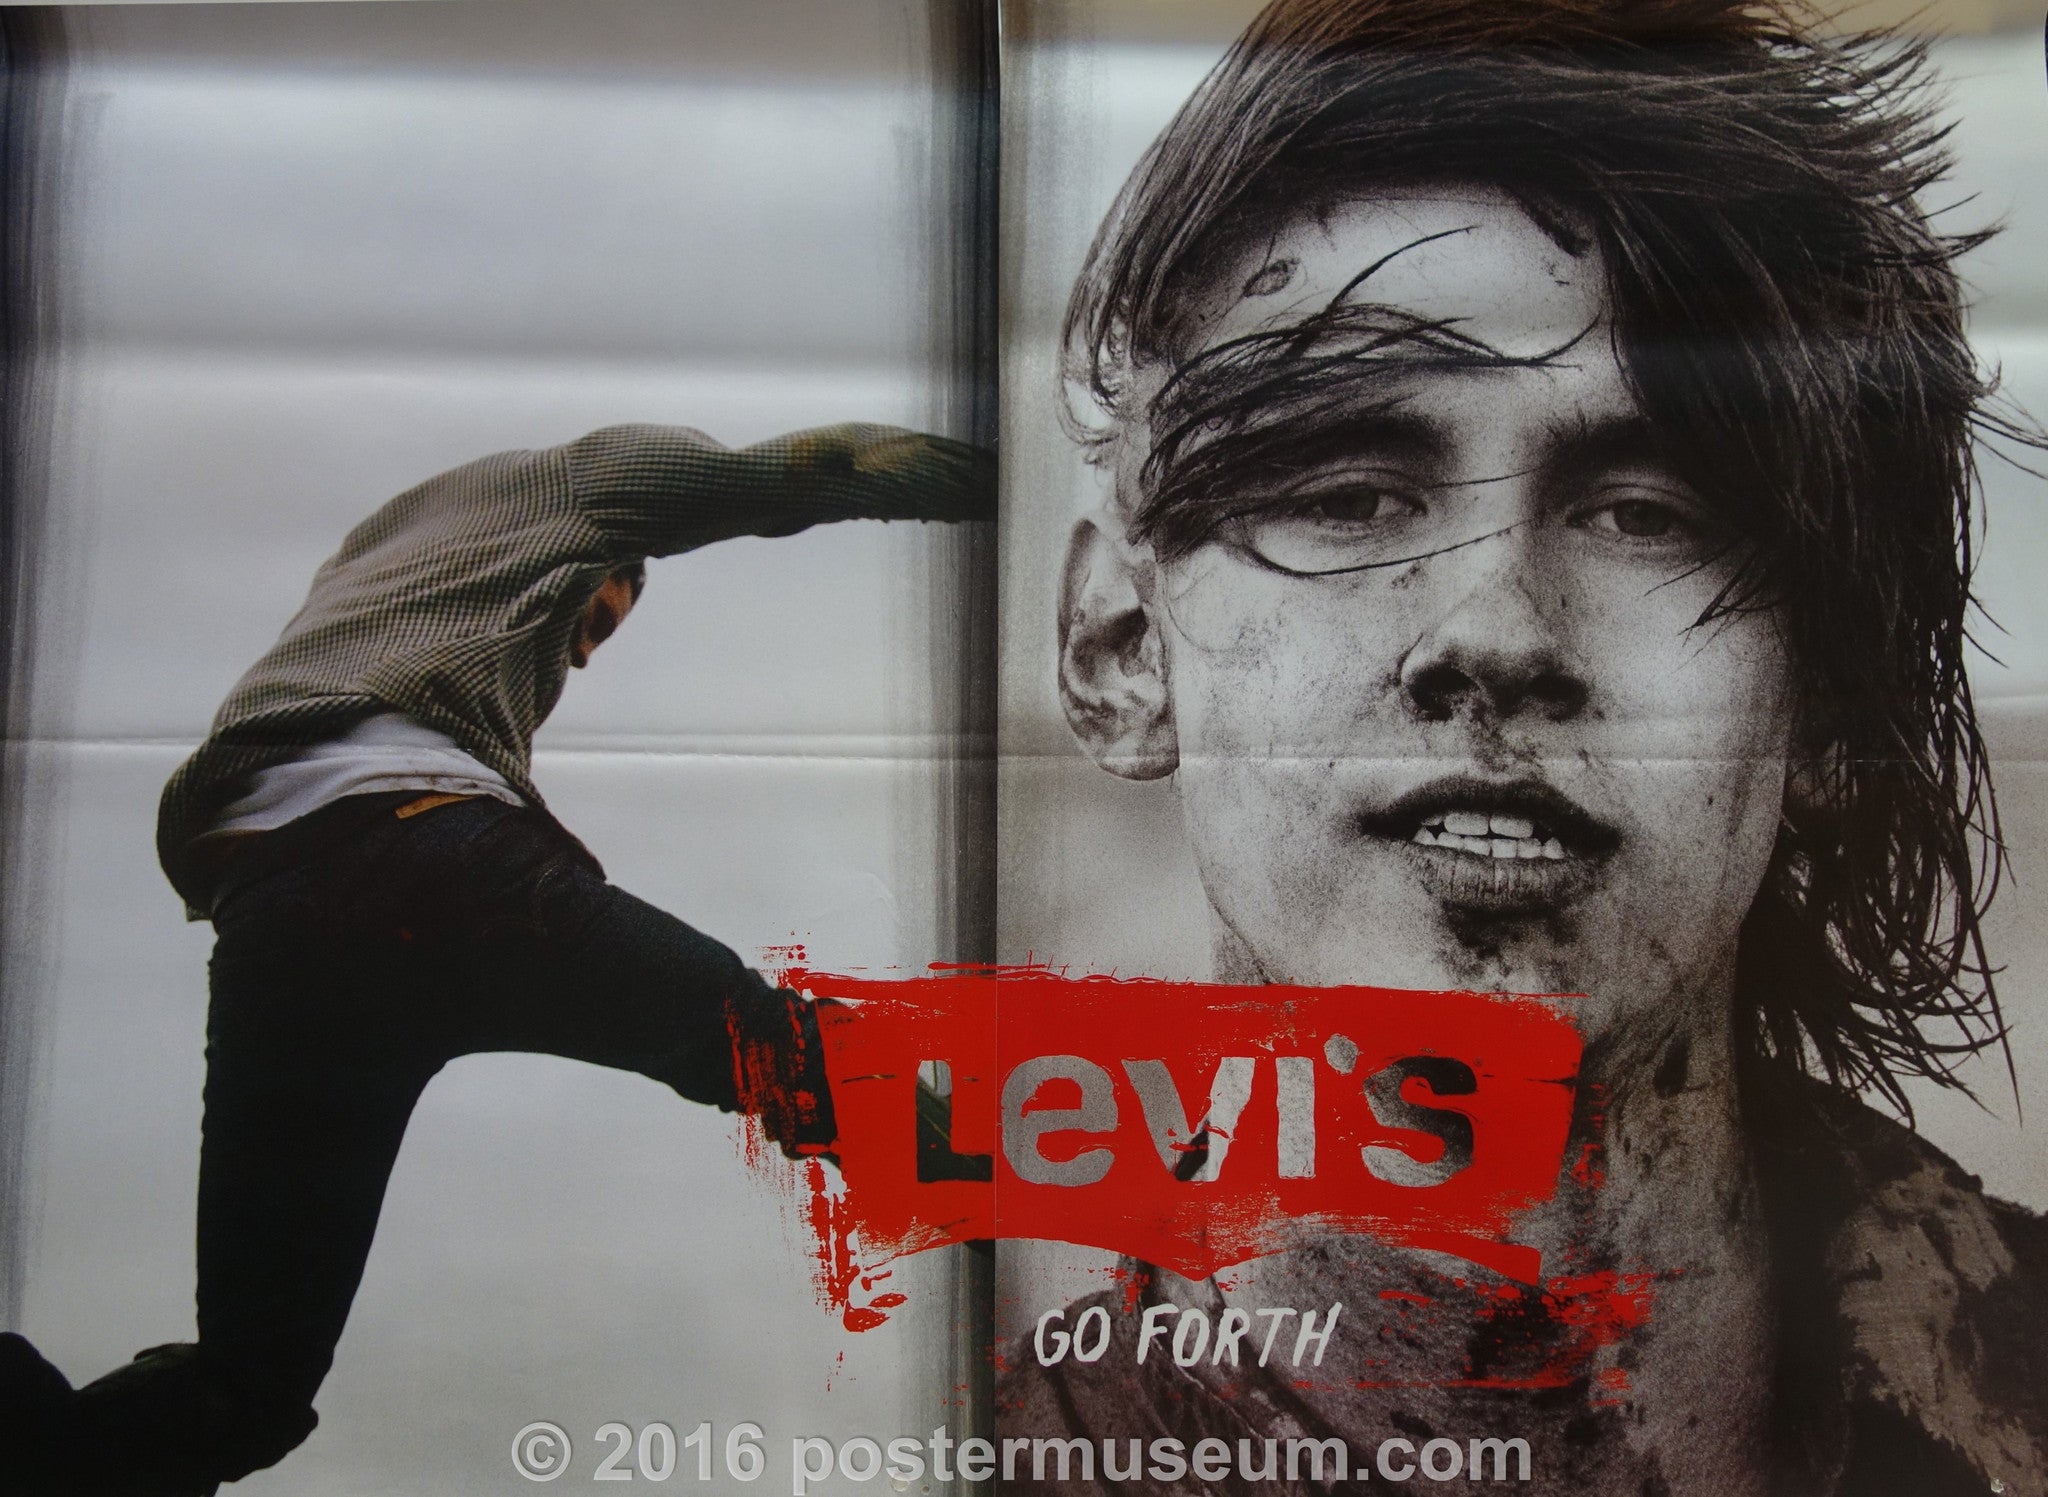 Levi's Go Forth